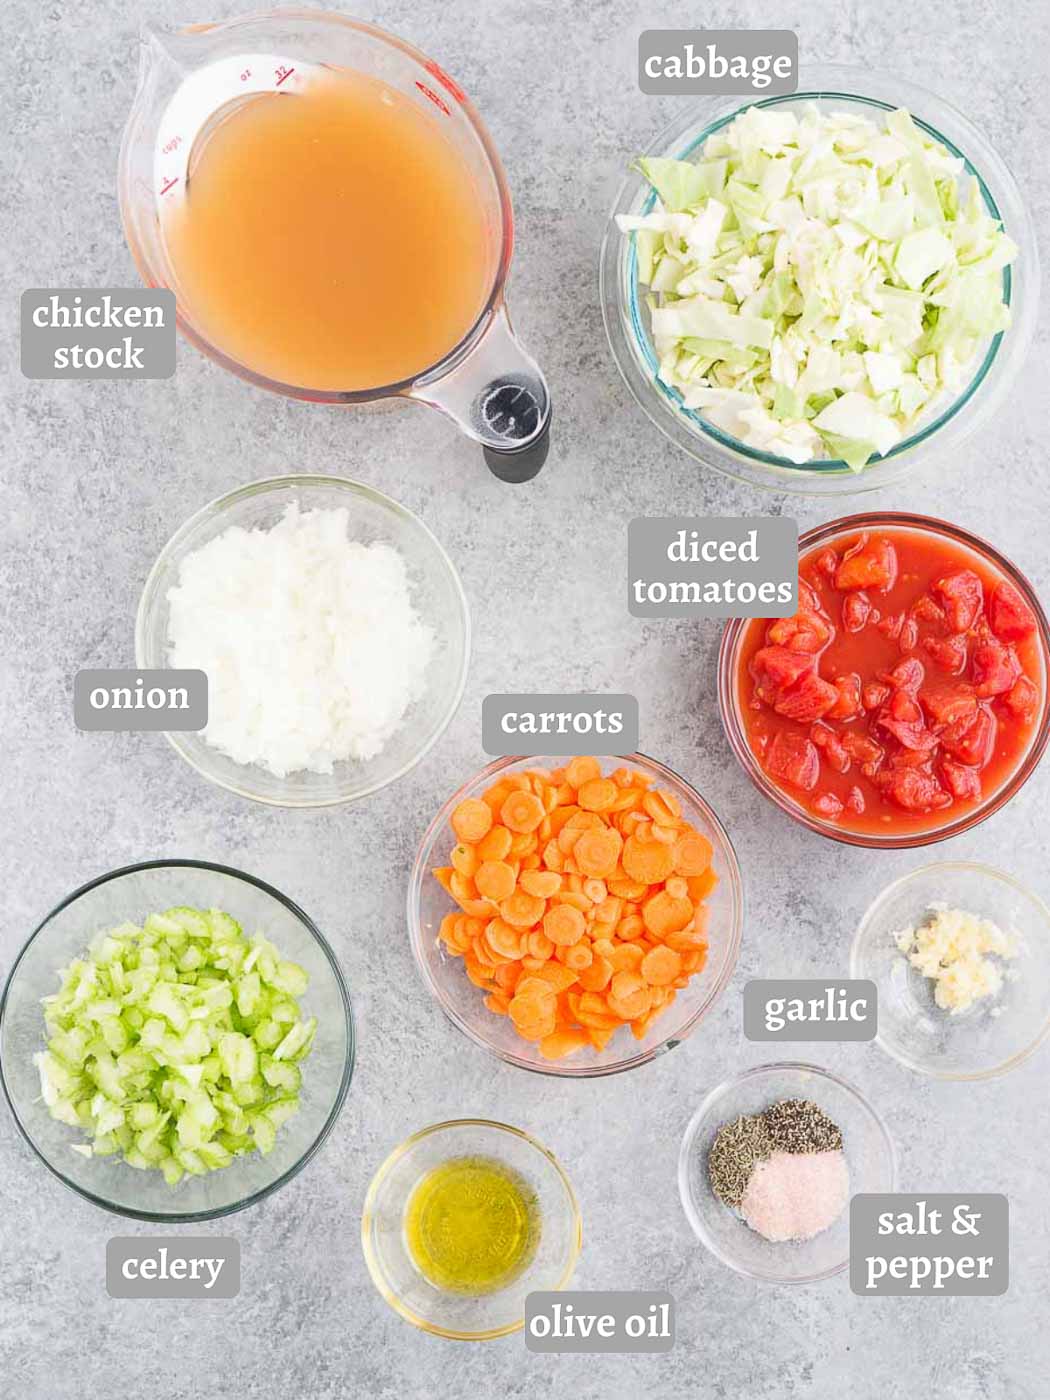 ingredients for cabbage soup recipe